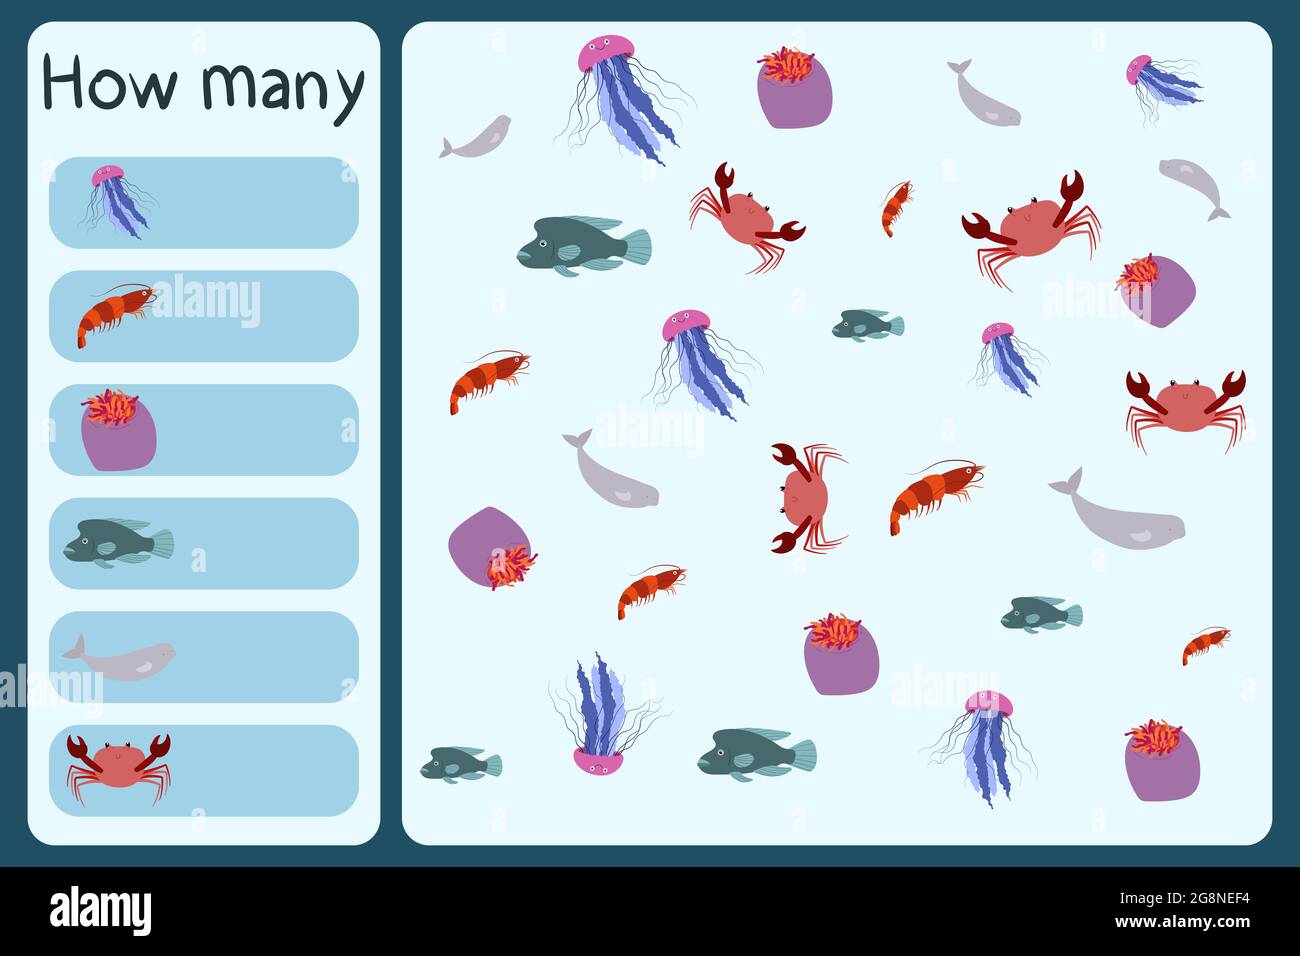 Kids mathematical mini game - count how many sea animals - jellyfish, shrimp, anemone, humphead wrasse, beluga whale, crab. Educational games for children. Cartoon design template Stock Vector